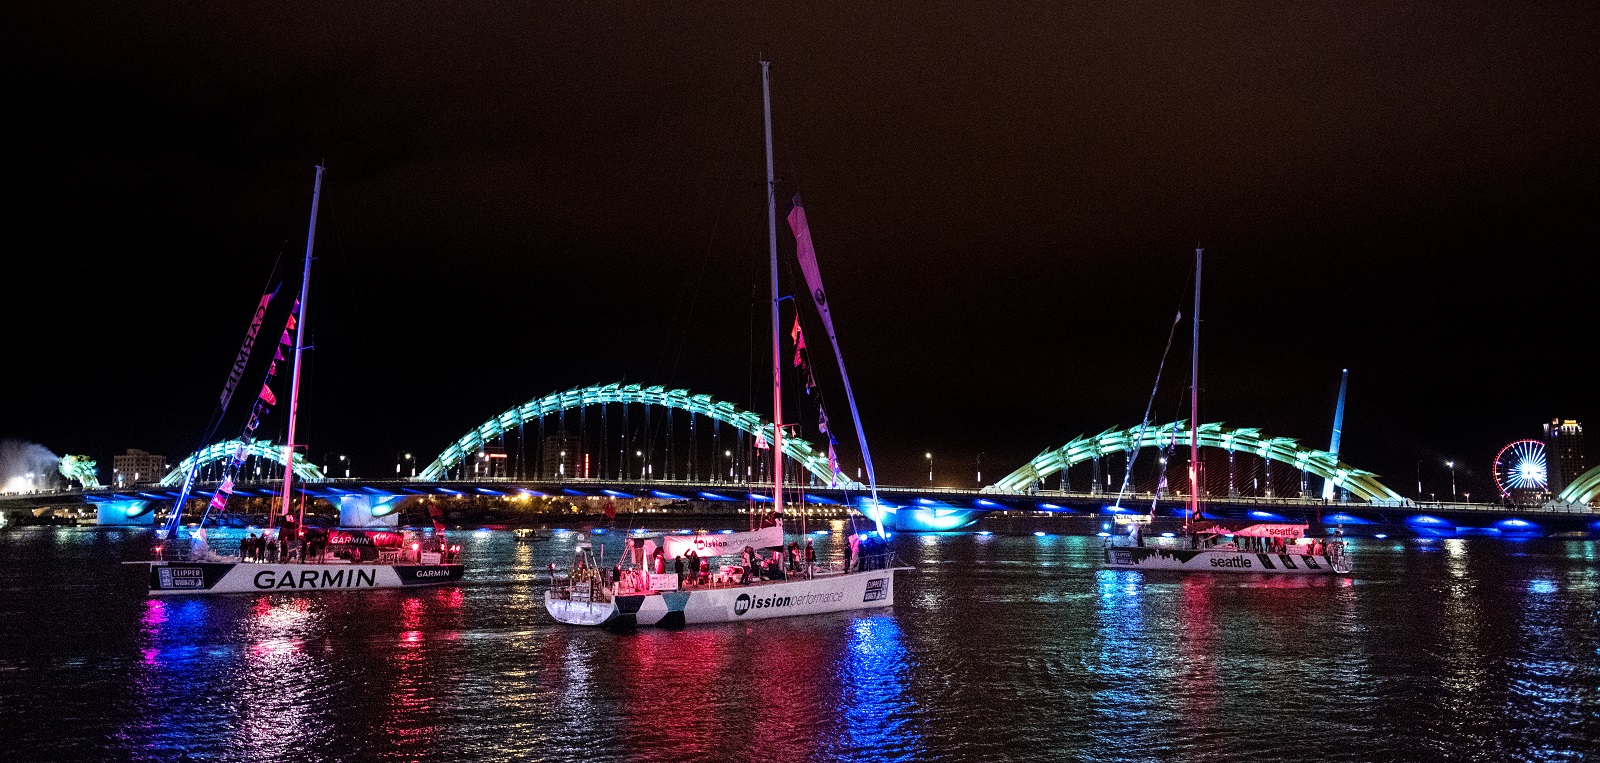 The Clipper Race fleet parades in front of the Dragon Bridge at night 